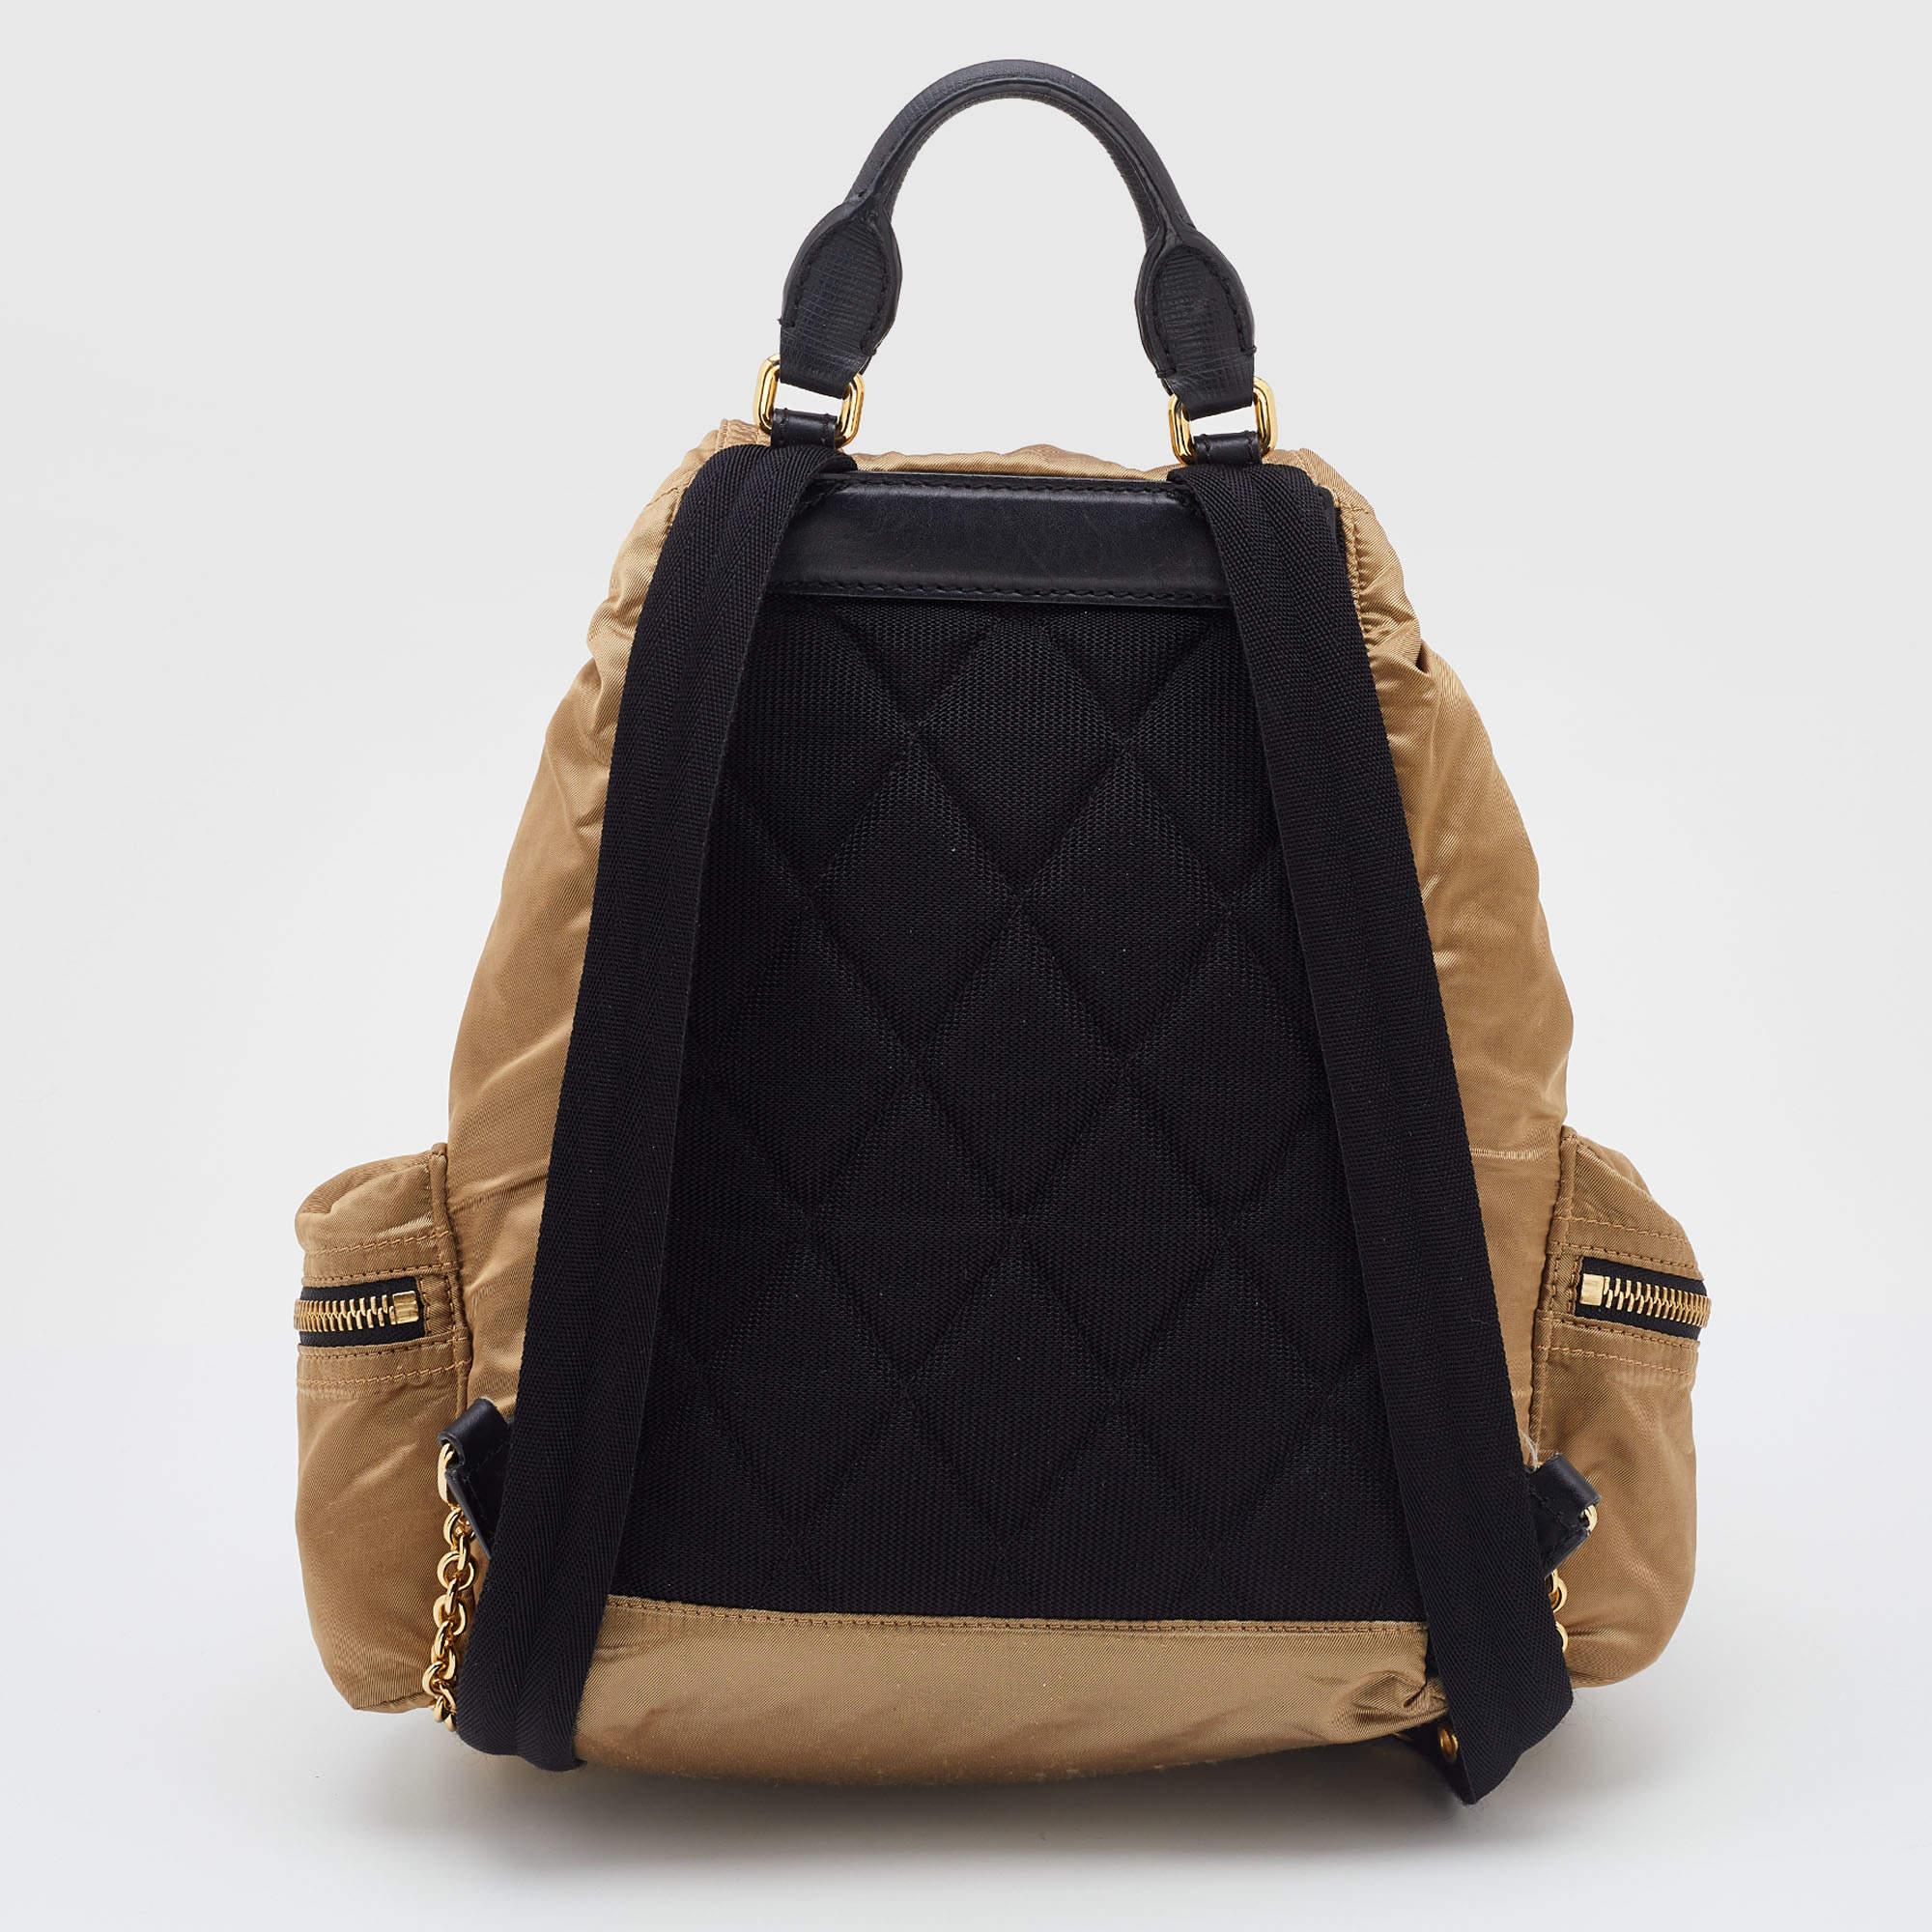 Marked by flawless craftsmanship and enduring appeal, this designer backpack is bound to be a versatile and durable accessory. It has a practical size.

Includes: Info Booklet, Branded Dustbag